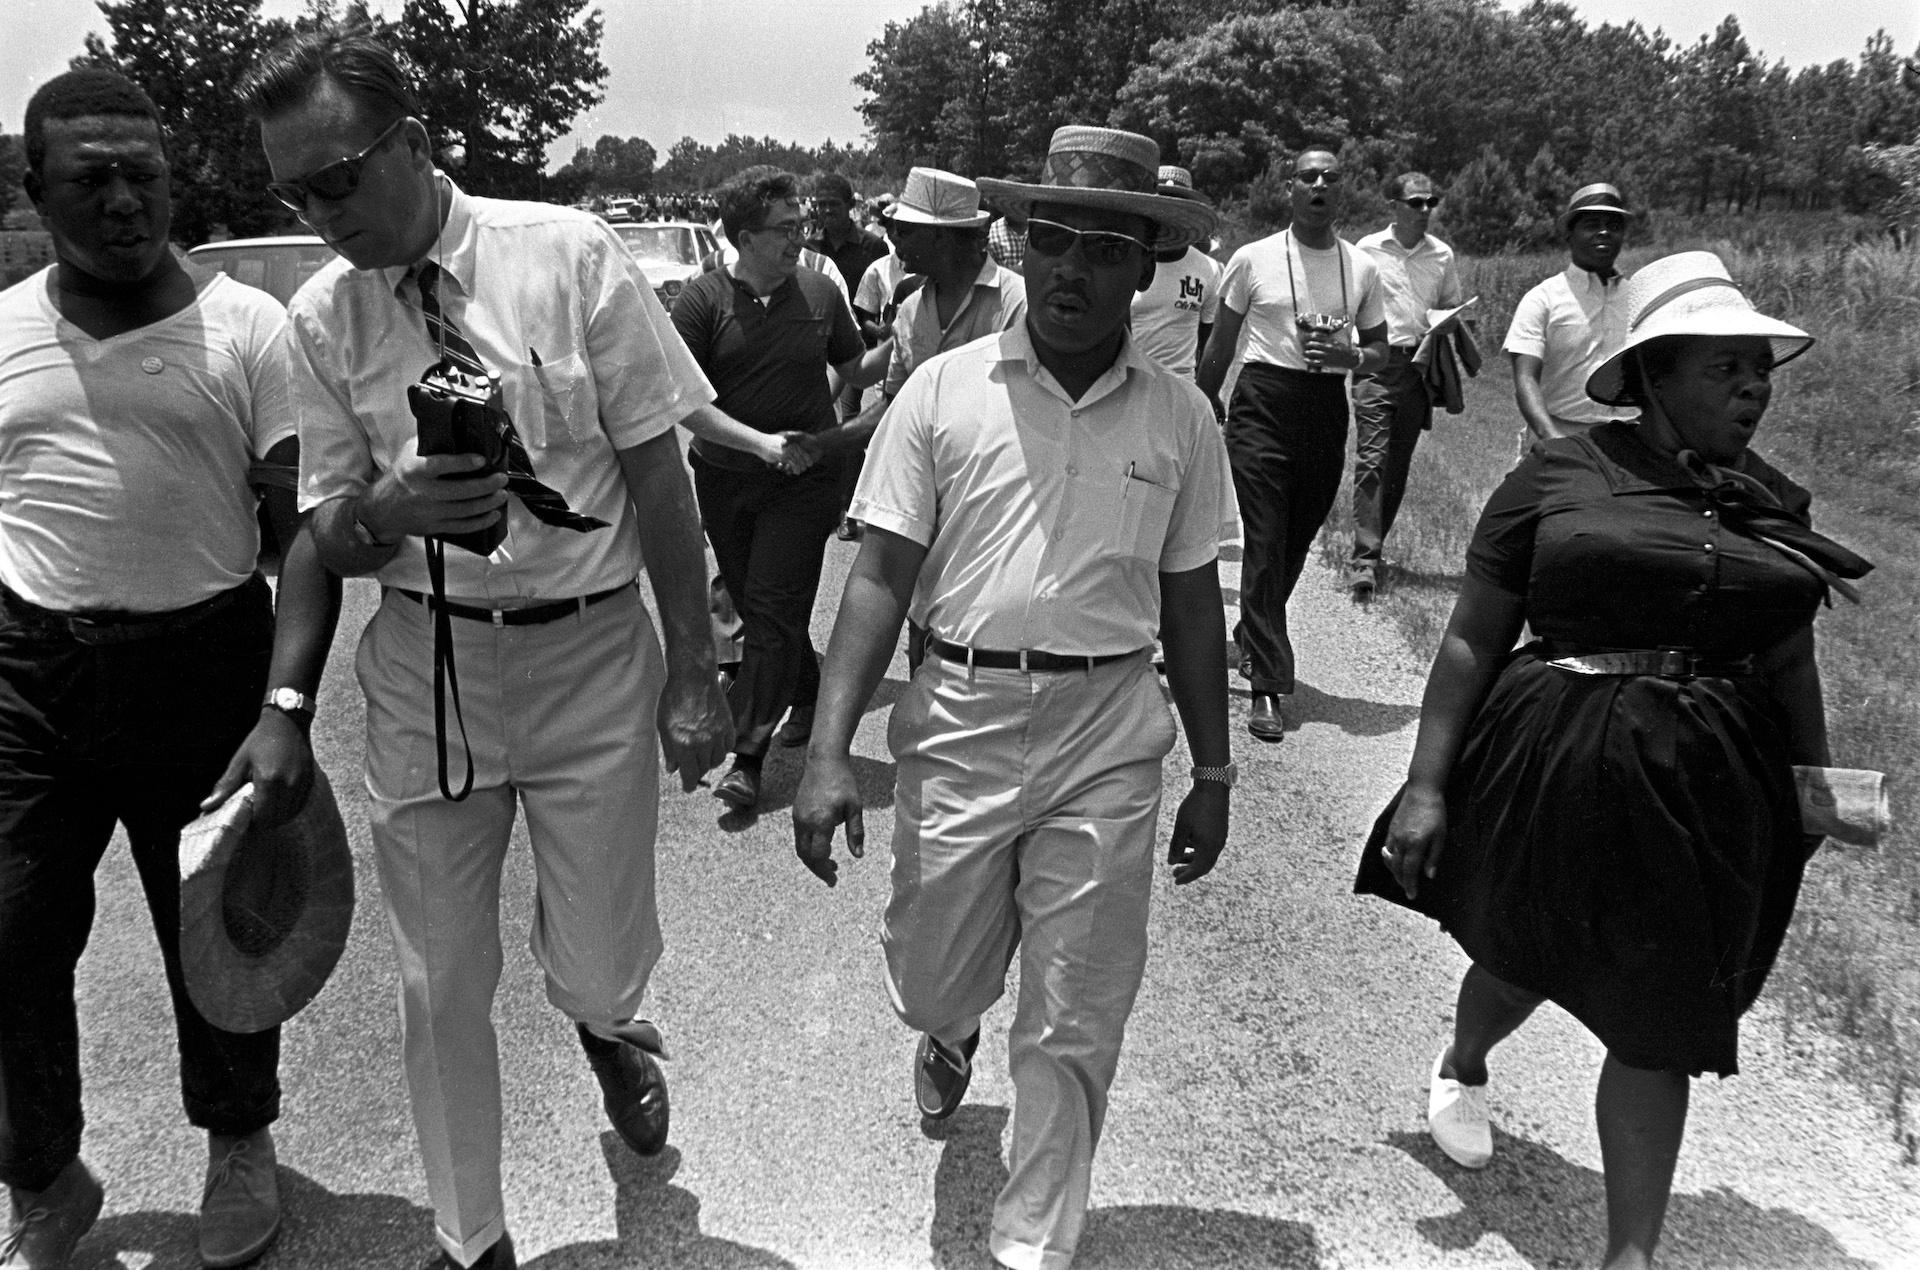 Jim Peppler photo: Martin Luther King, Jr., Fannie Lou Hamer, and others, participating in the "March Against Fear" through Mississippi, begun by James Meredith.